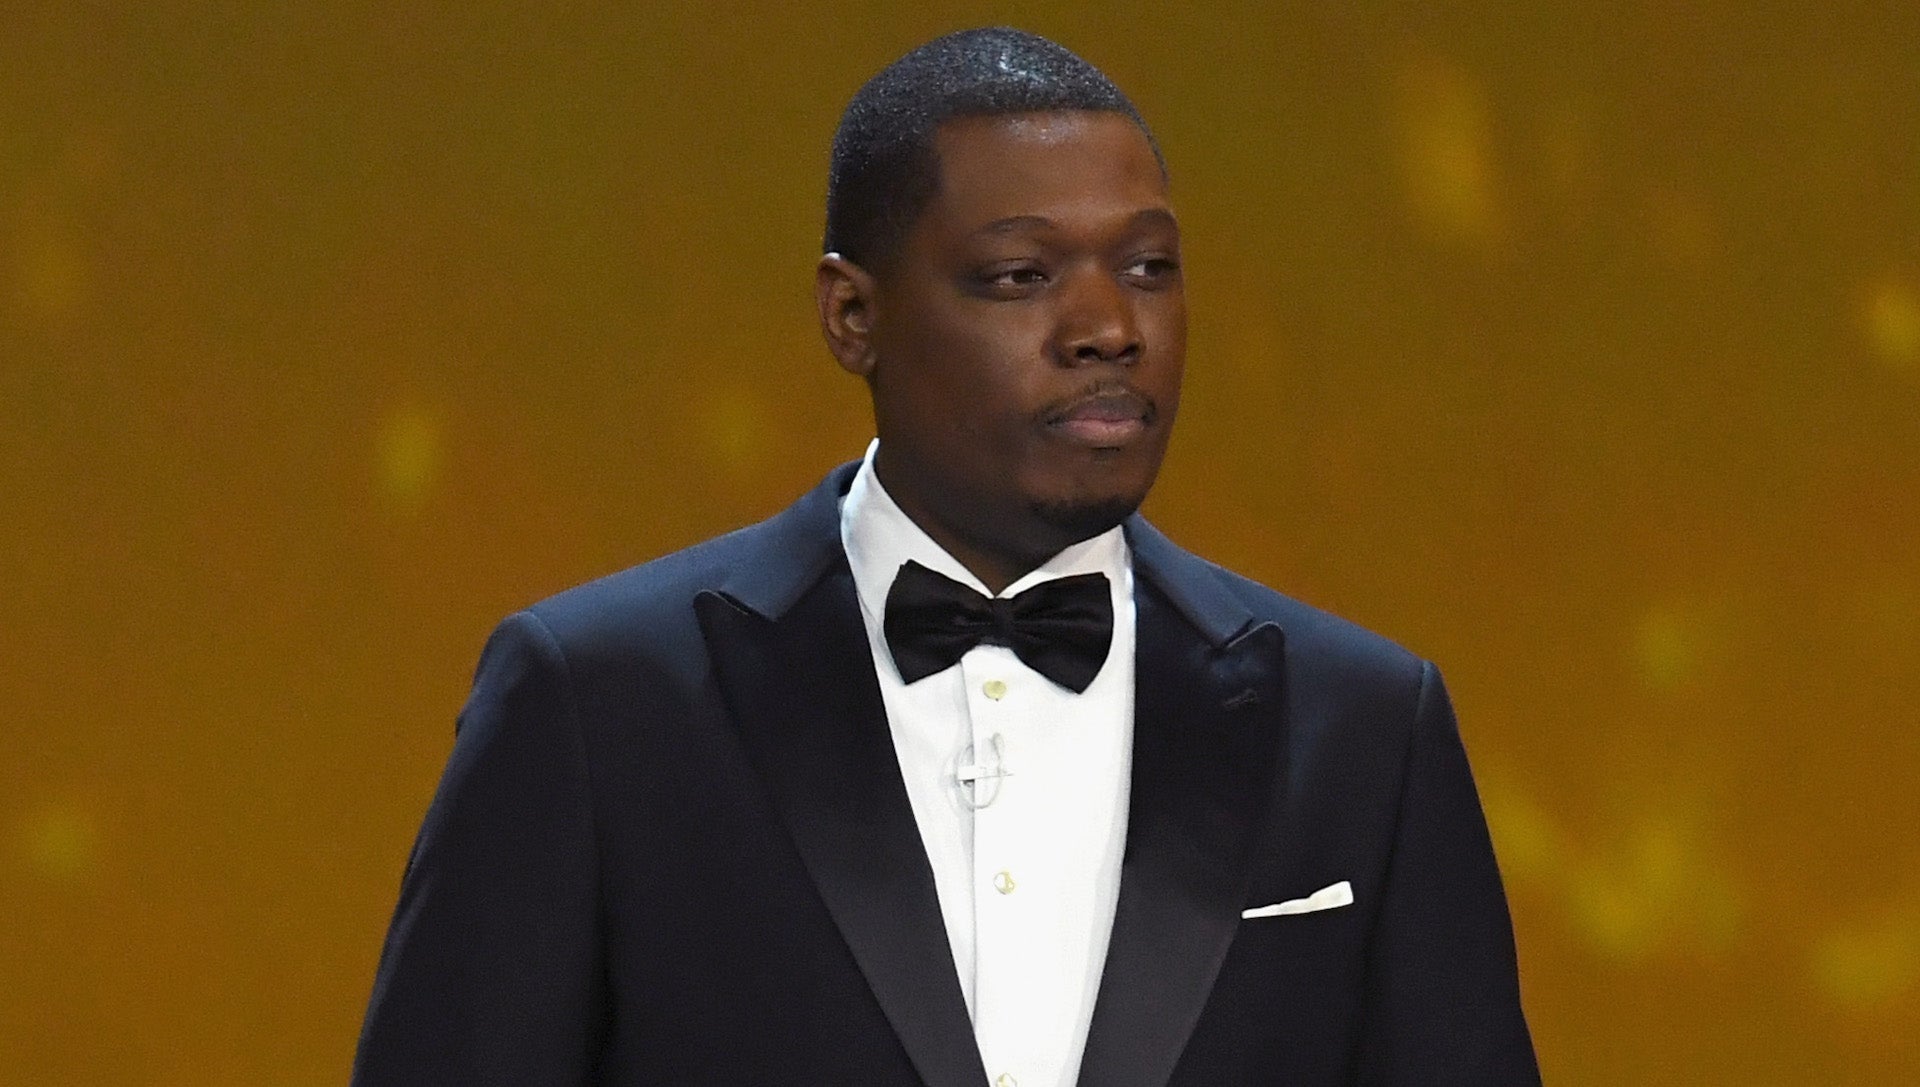 Michael Che Will Pay One Month’s Rent For 160 New York Apartments Amid Coronavirus Outbreak